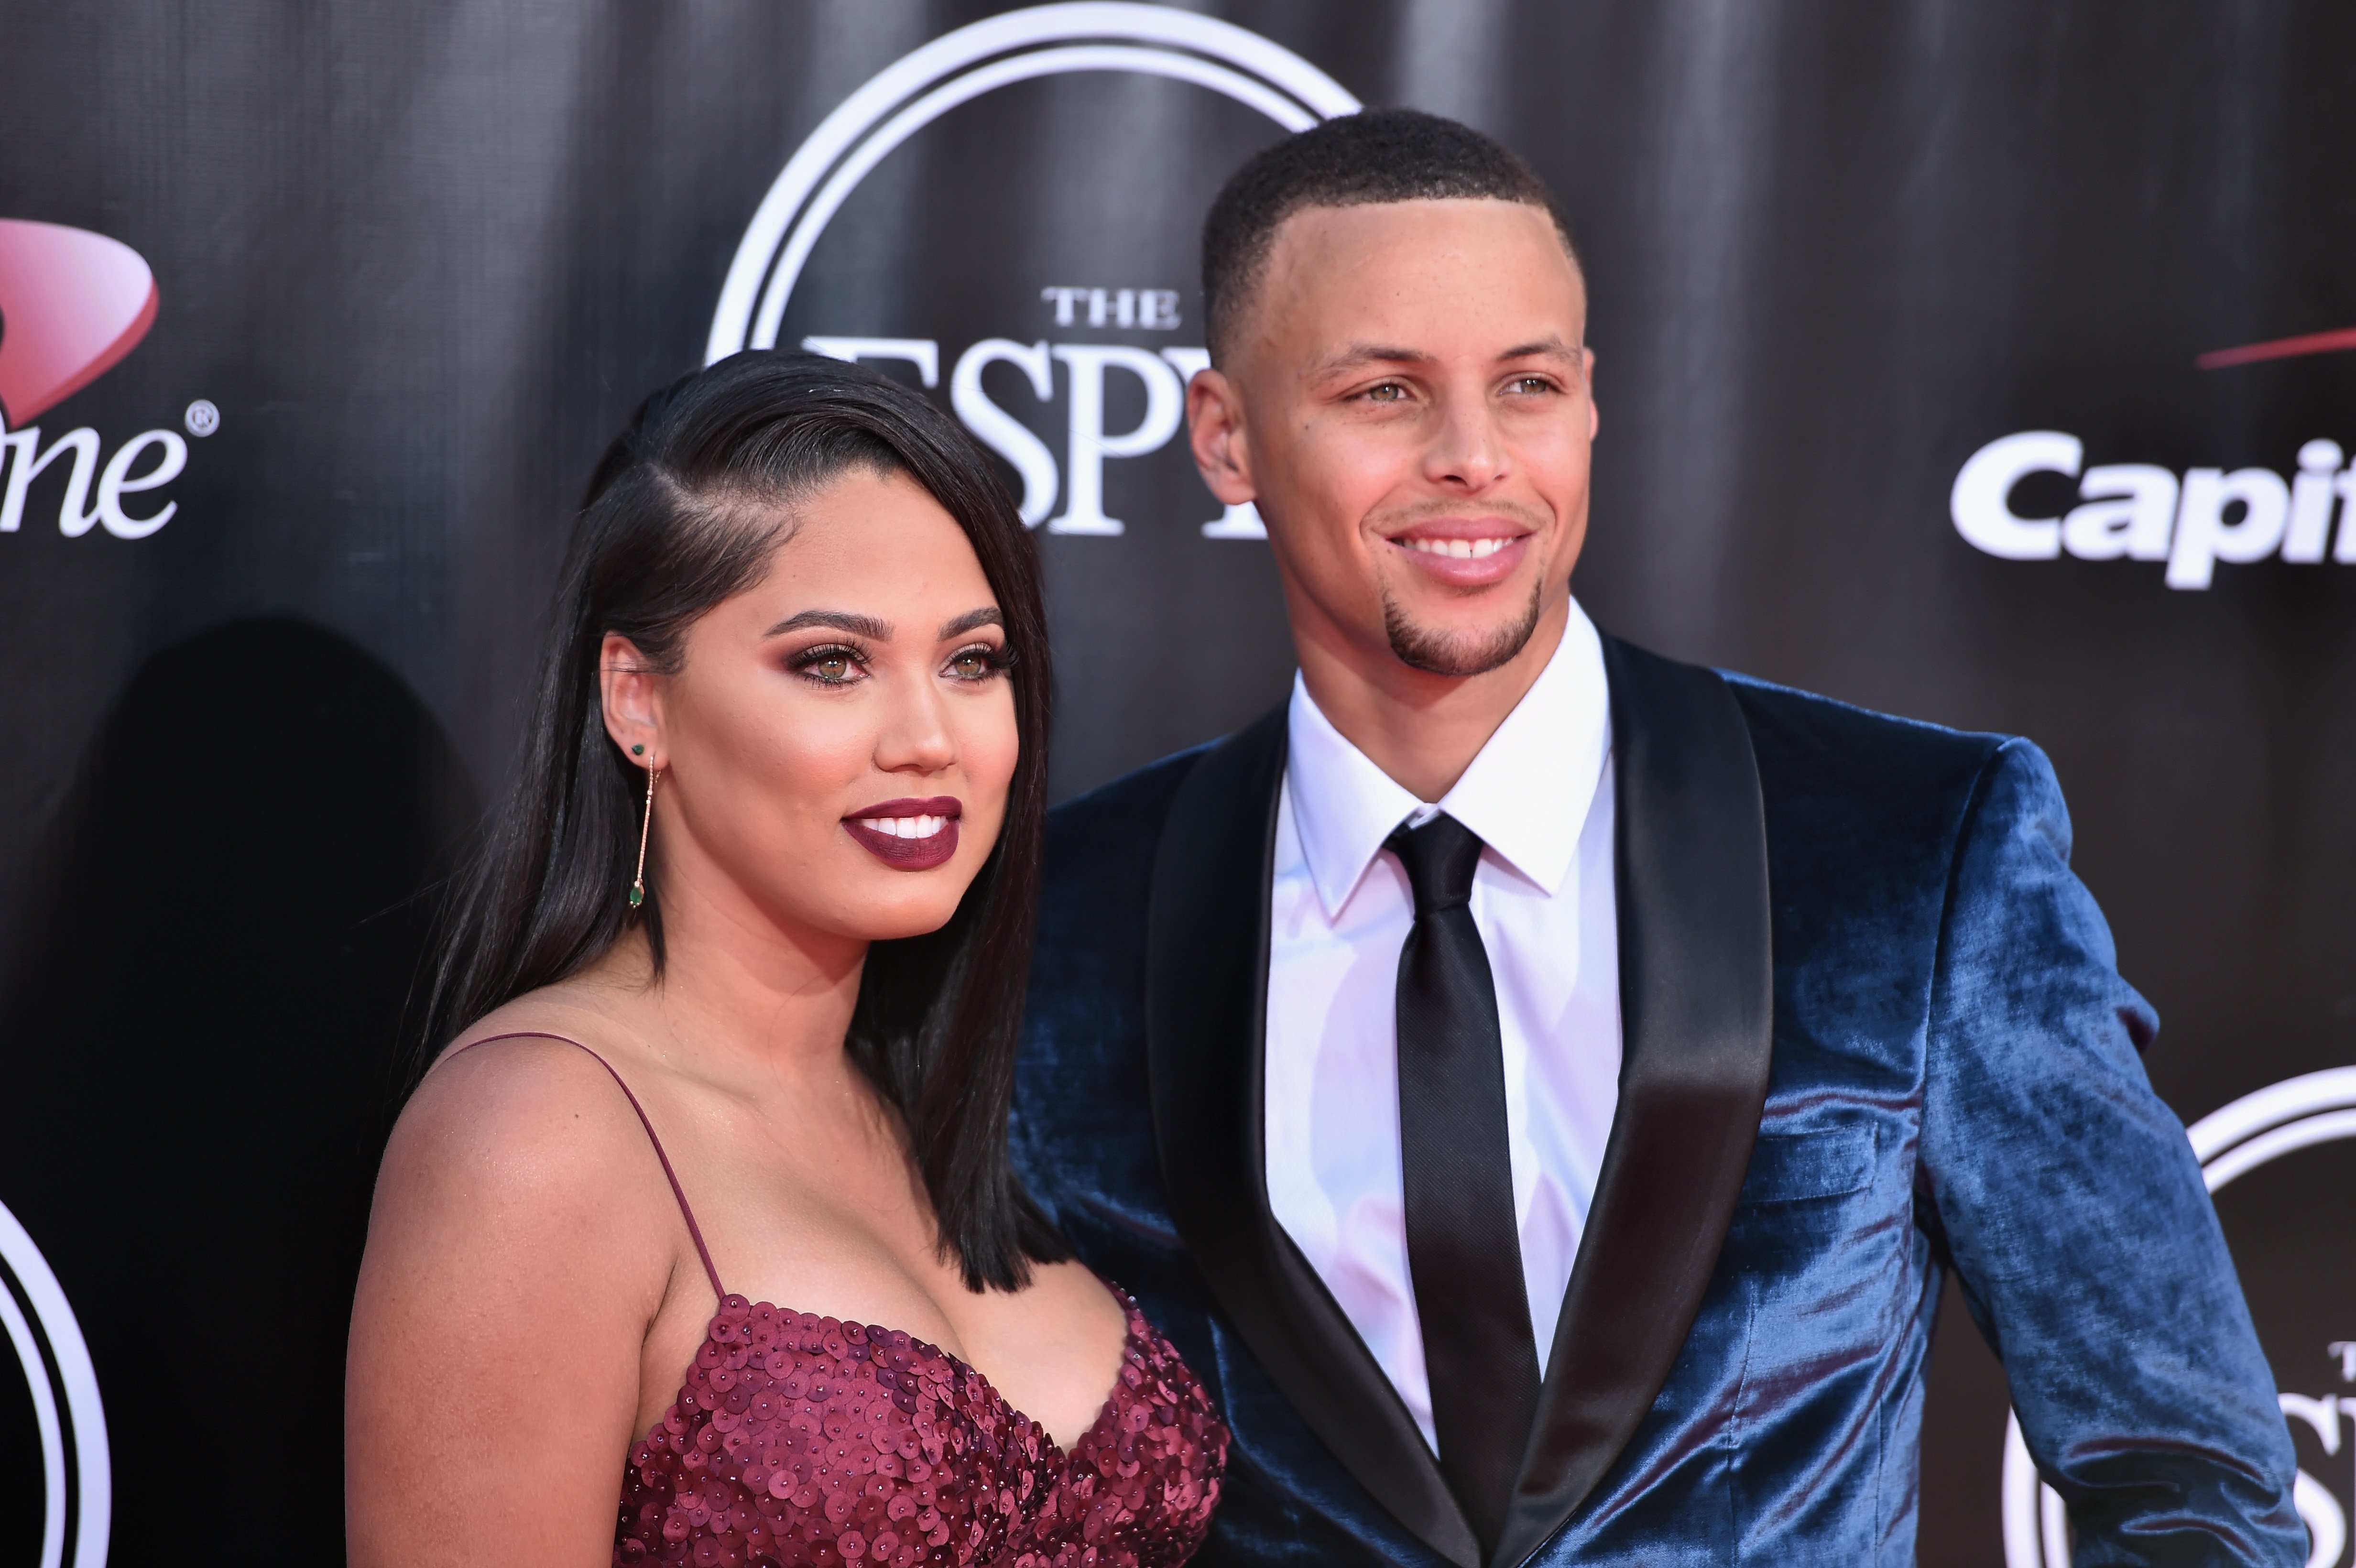 Stephen Curry and Ayesha Curry attend the 2016 ESPYS at Microsoft Theater on July 13, 2016. | Photo: Getty Images